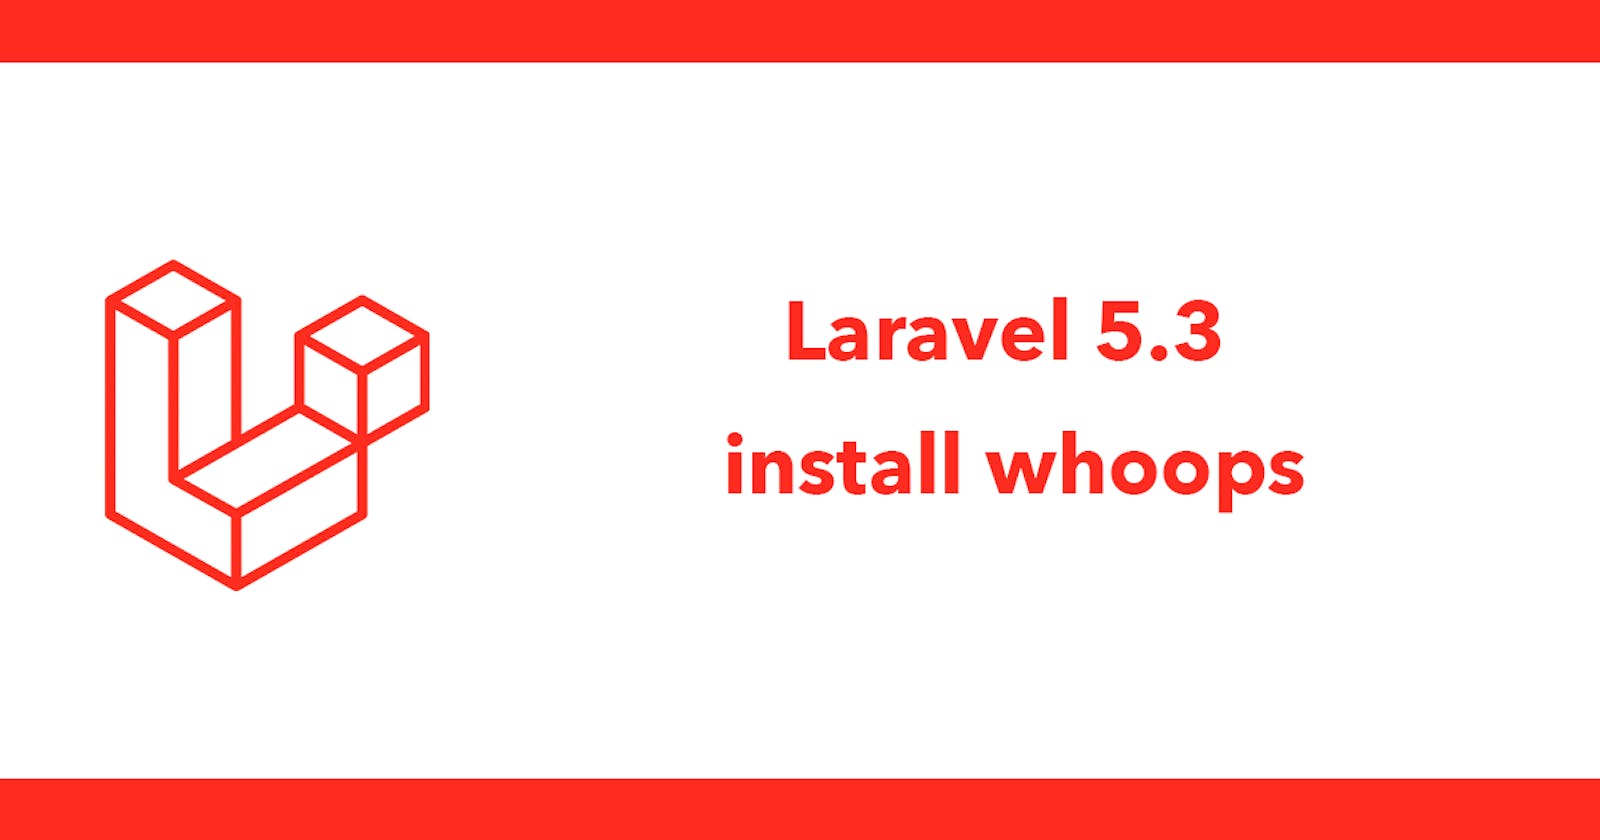 Laravel 5.3 install whoops